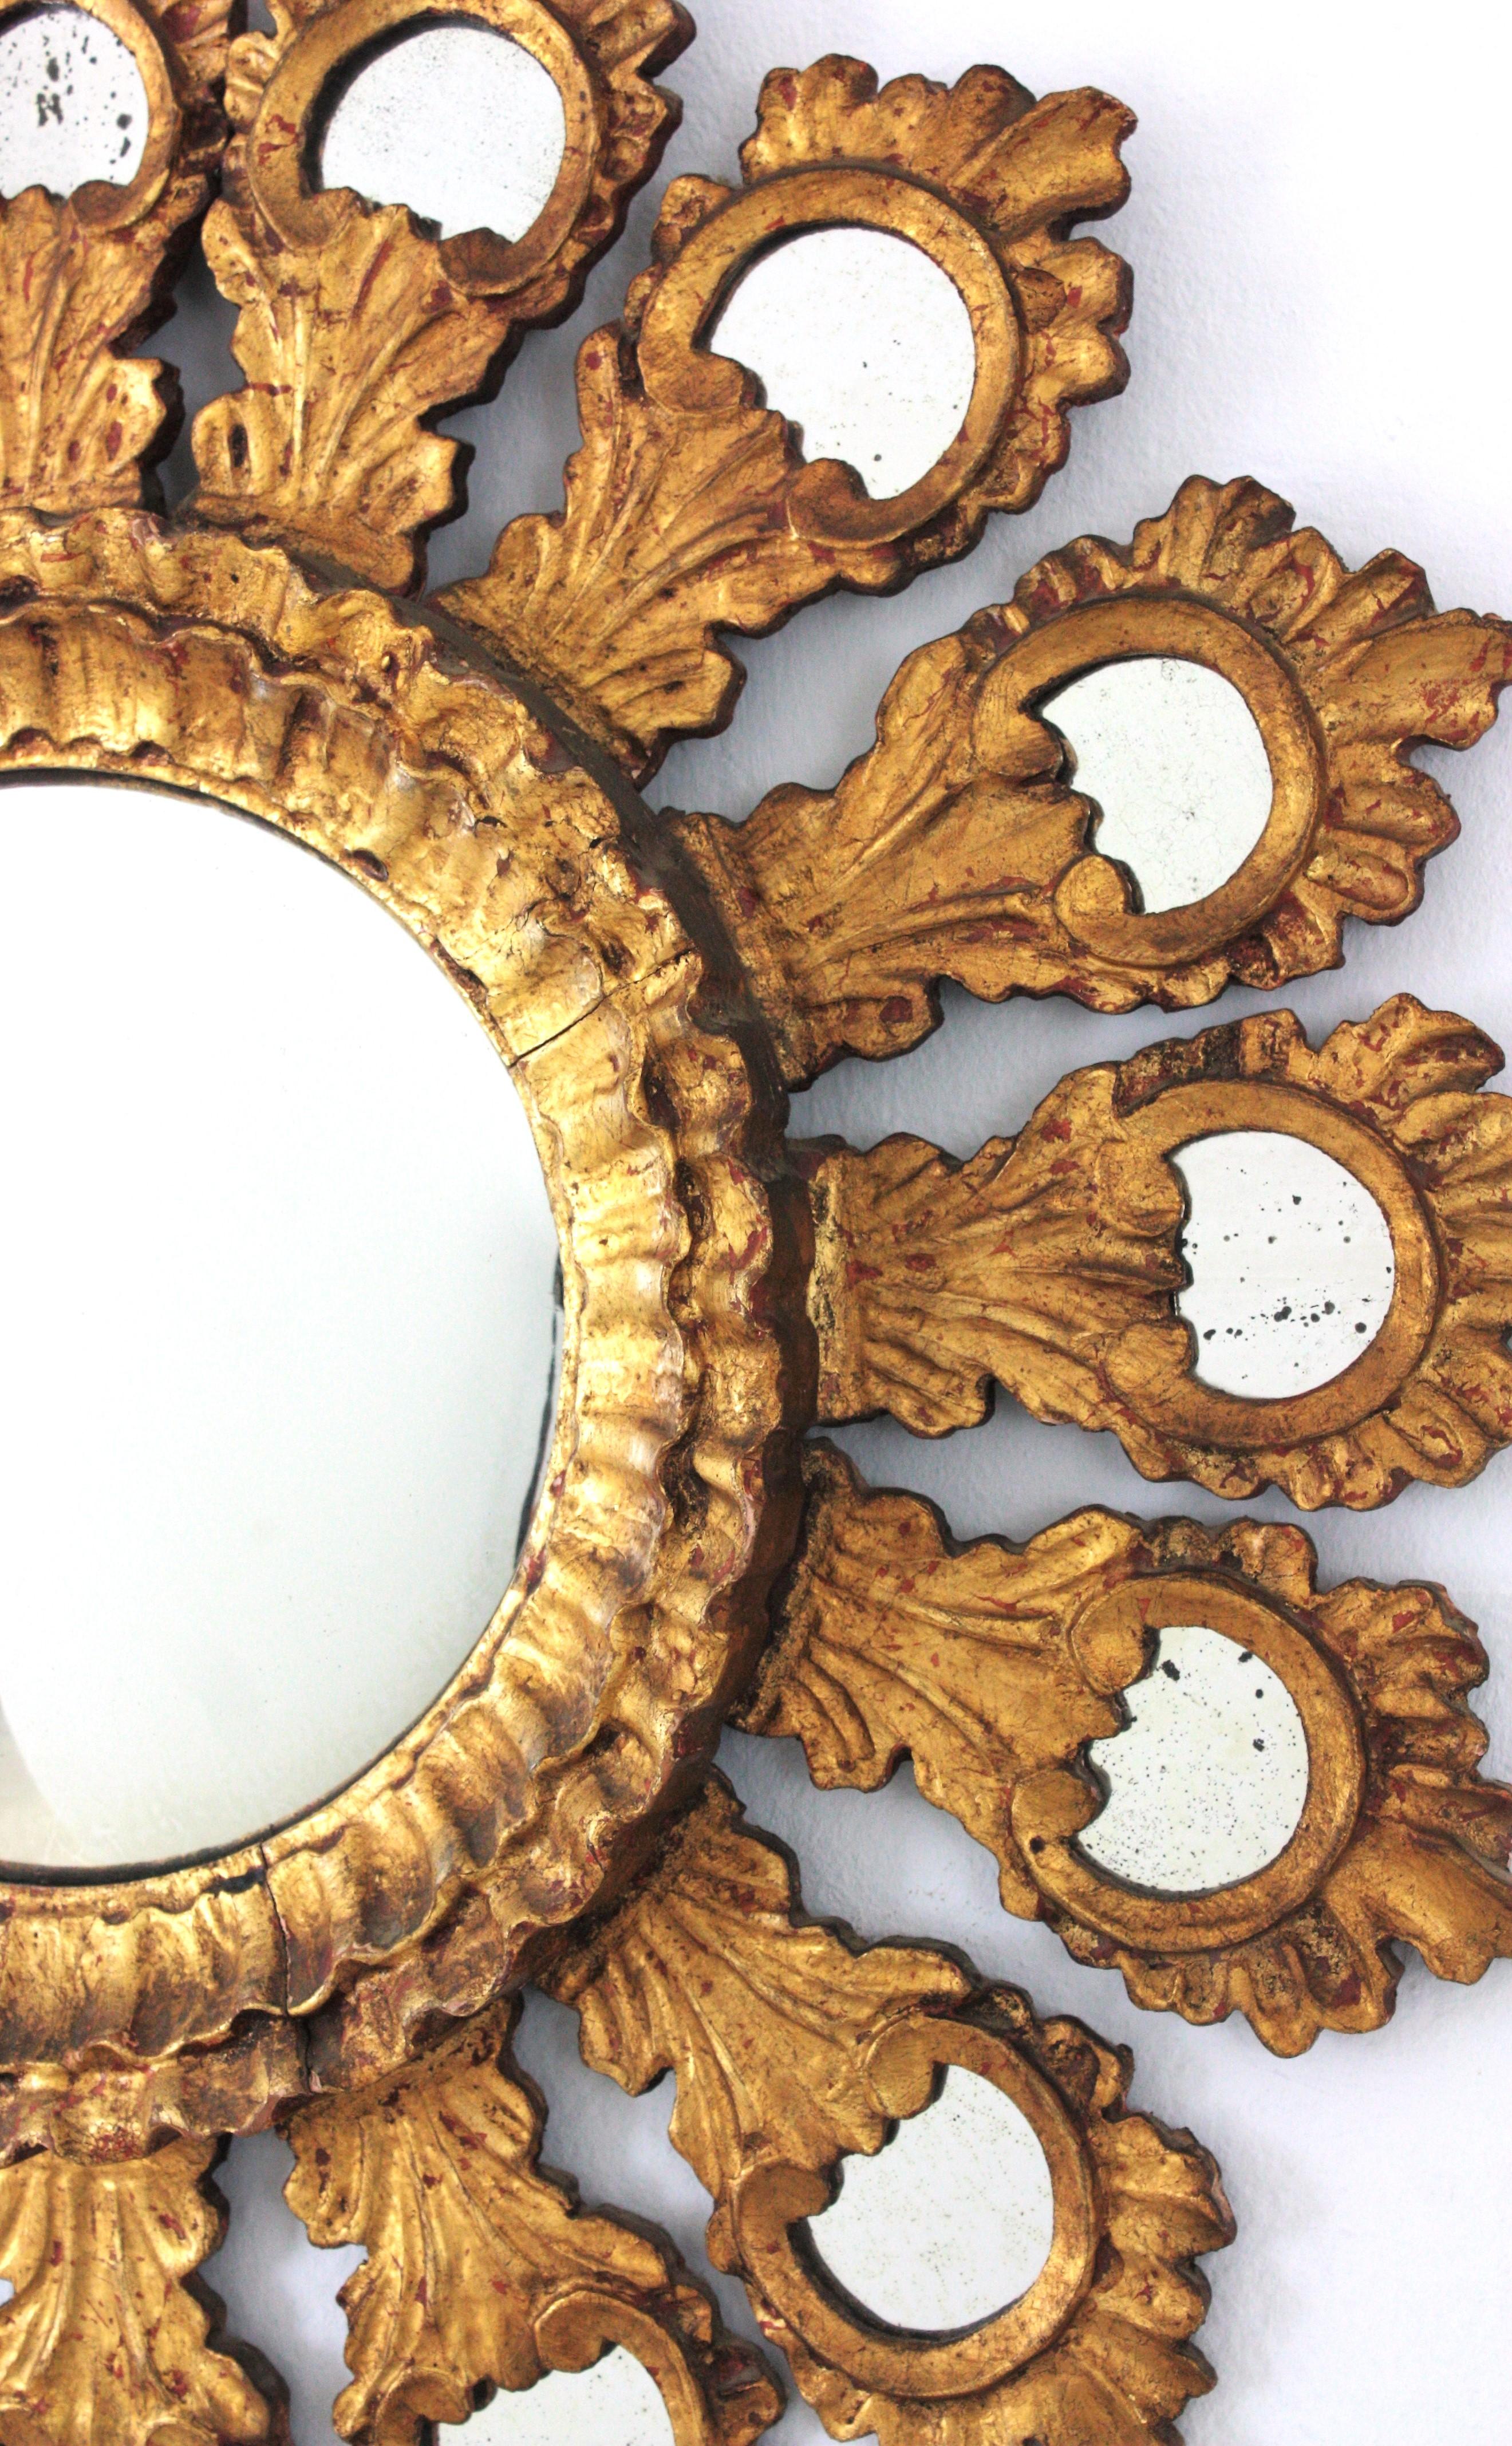 Spanish Baroque Sunburst Gilt Carved Wood Bullseye Mirror with Mirror Insets For Sale 4